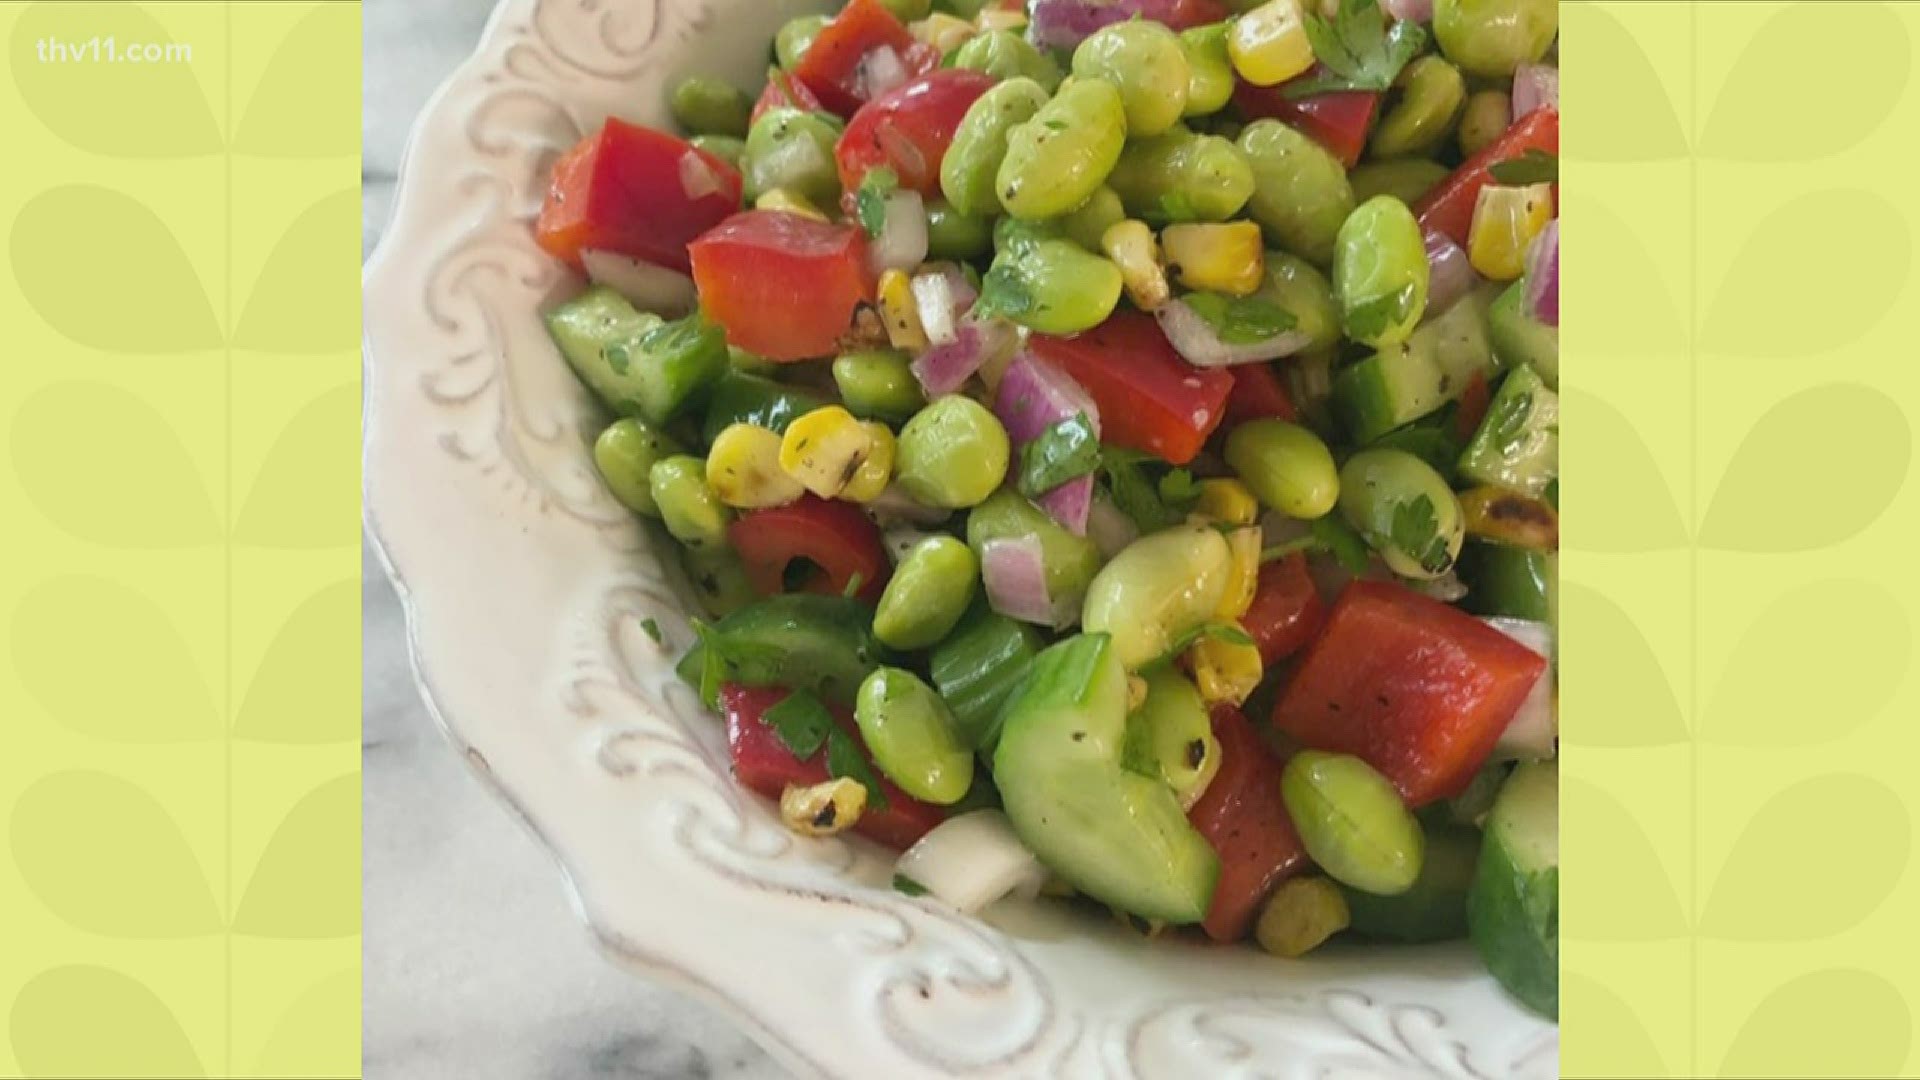 Whether you're camping out or grilling in your backyard, this delicious and healthy salad is a perfect side dish!